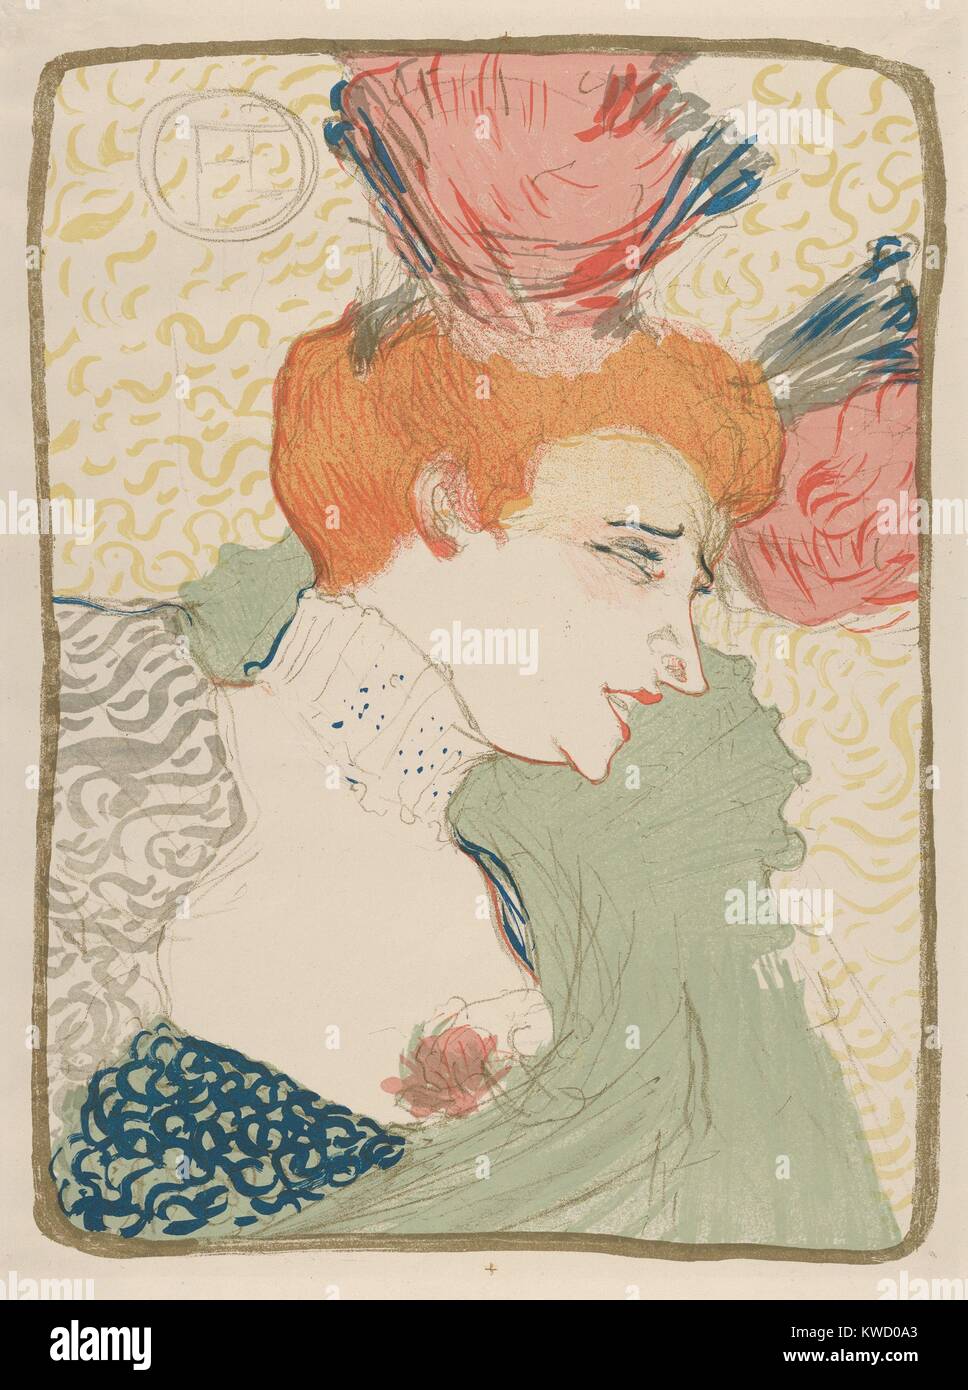 Mademoiselle Marcelle Lender, by Henri de Toulouse-Lautrec, 1895, French Post-Impressionist print. The French singer and dancer was a favorite of the artist who featured her in 12 lithographs (BSLOC 2017 5 70) Stock Photo